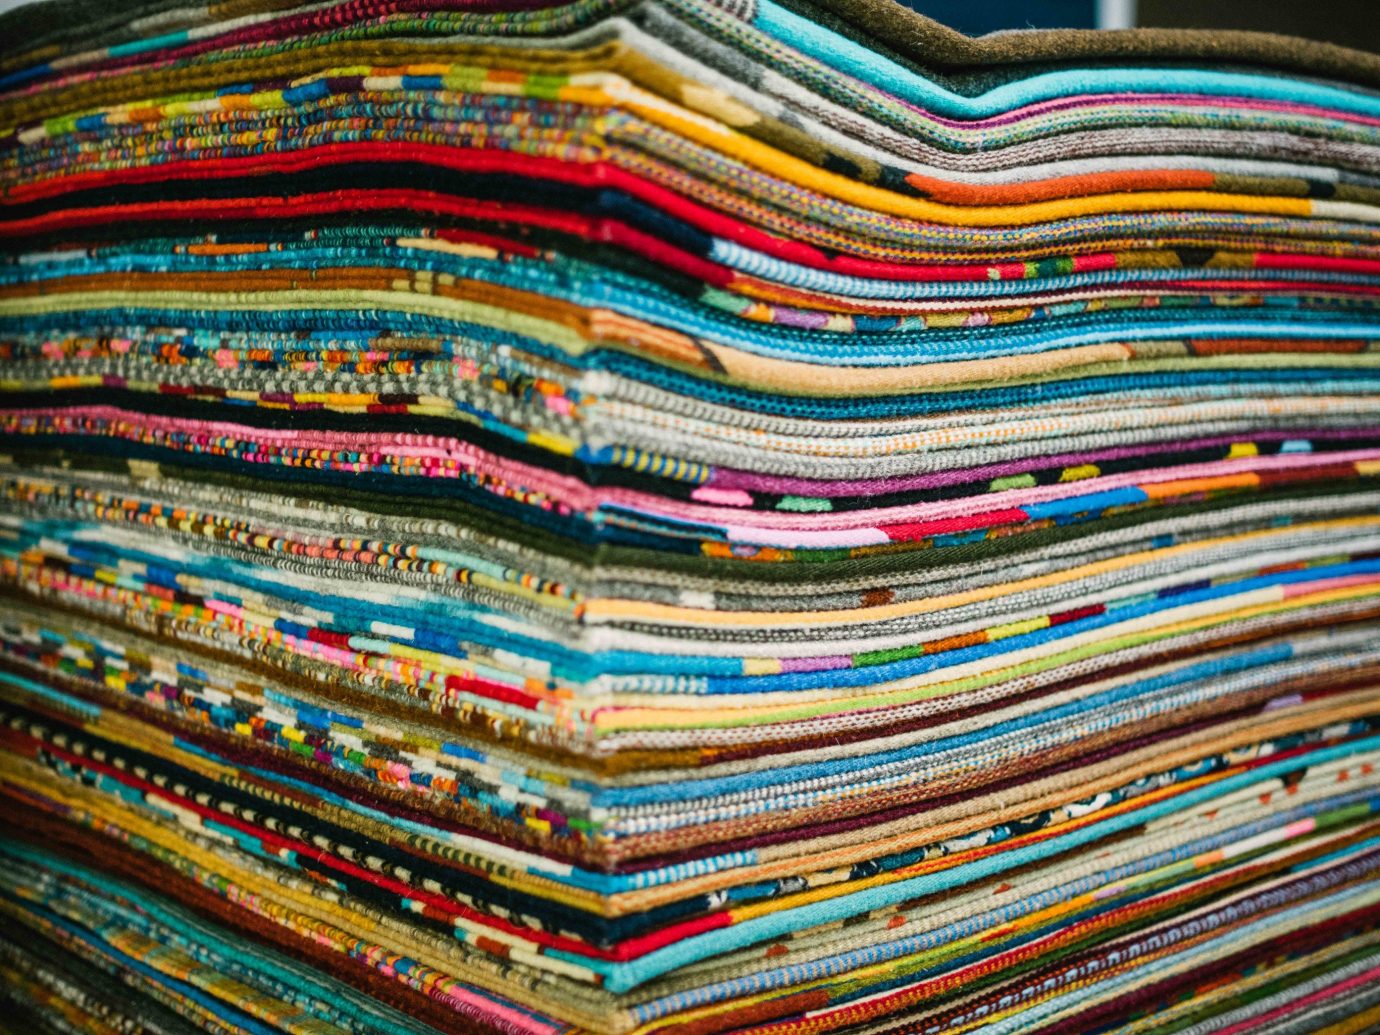 Arts + Culture Mexico Oaxaca Trip Ideas textile thread material colorful pattern stack colored